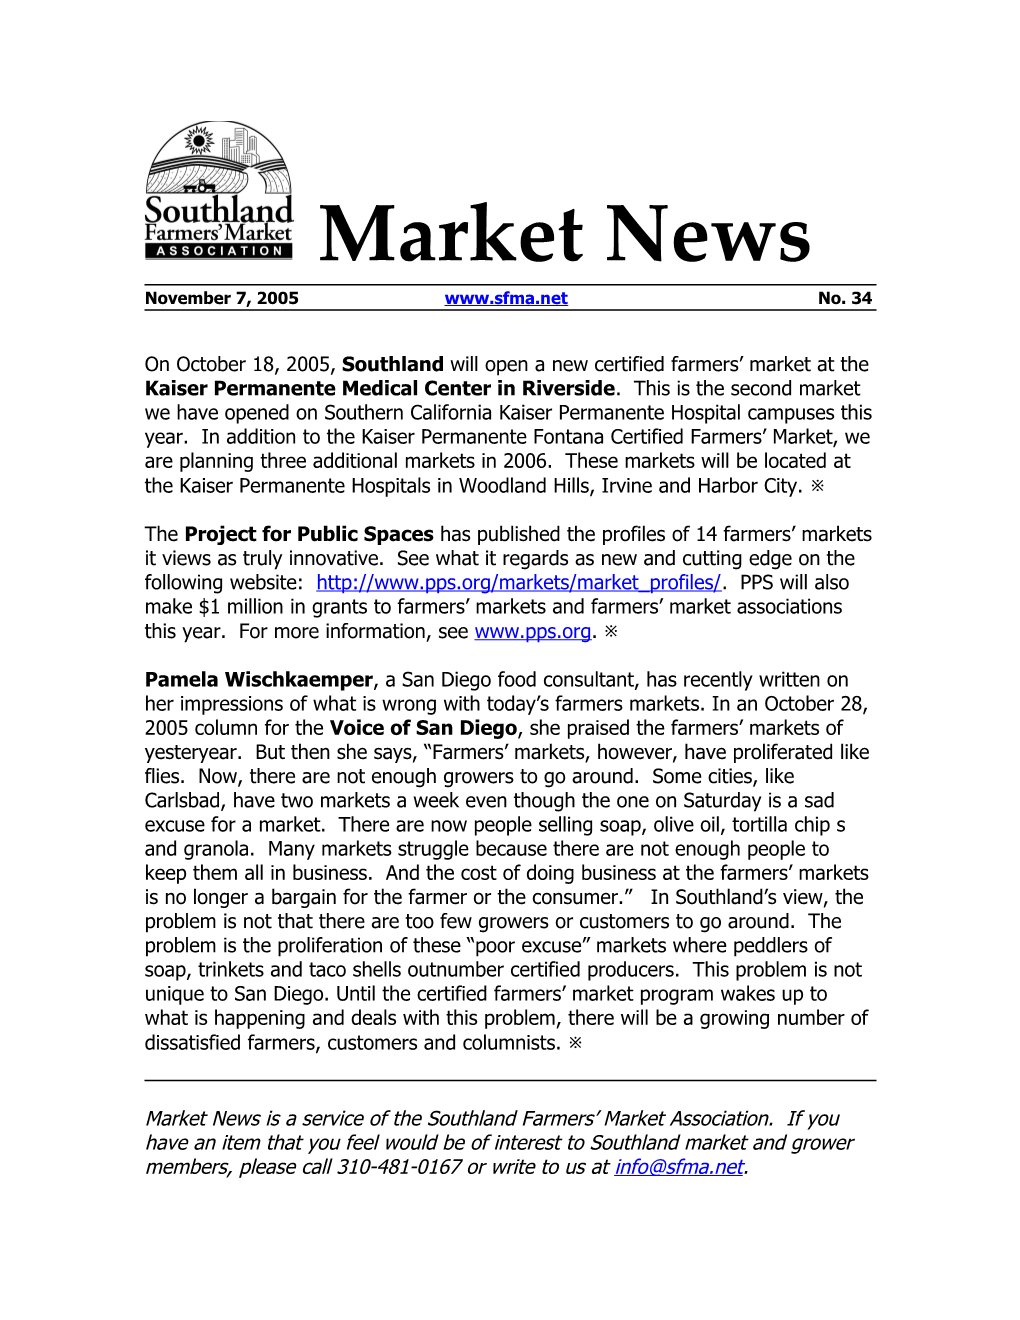 On October 18, 2005, Southland Will Open a New Certified Farmers Market at the Kaiser Permanente